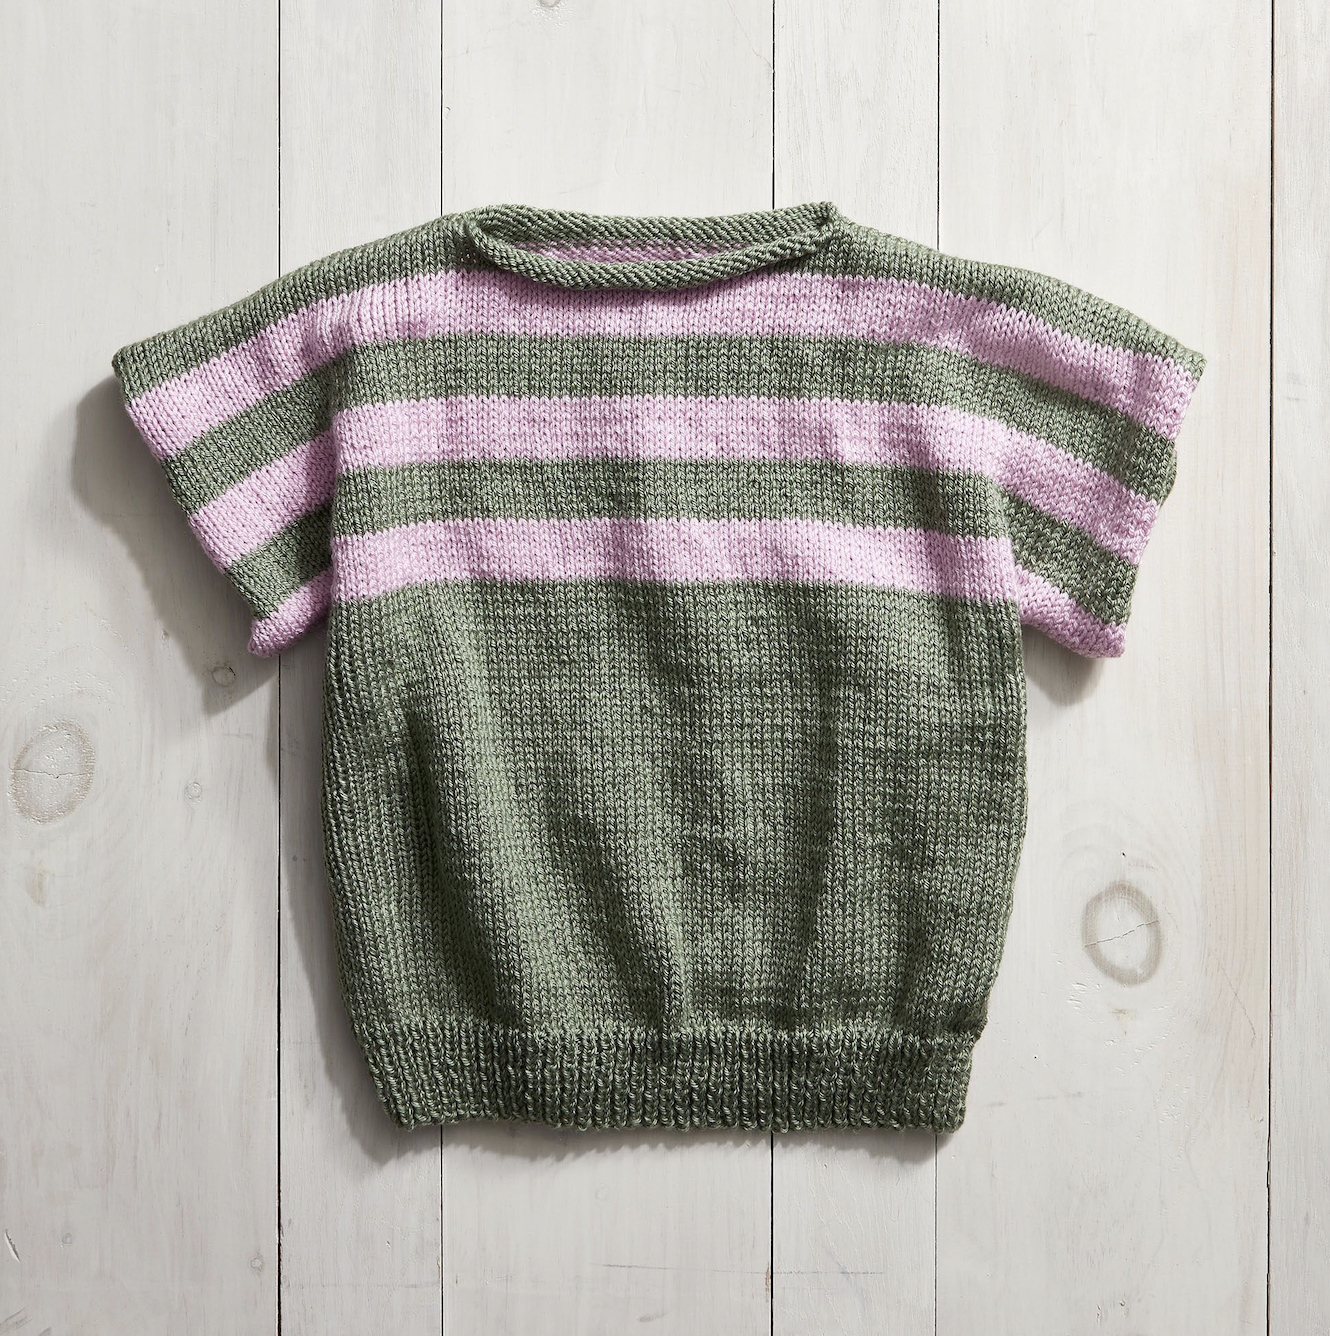 simply knit boatneck top tutorial